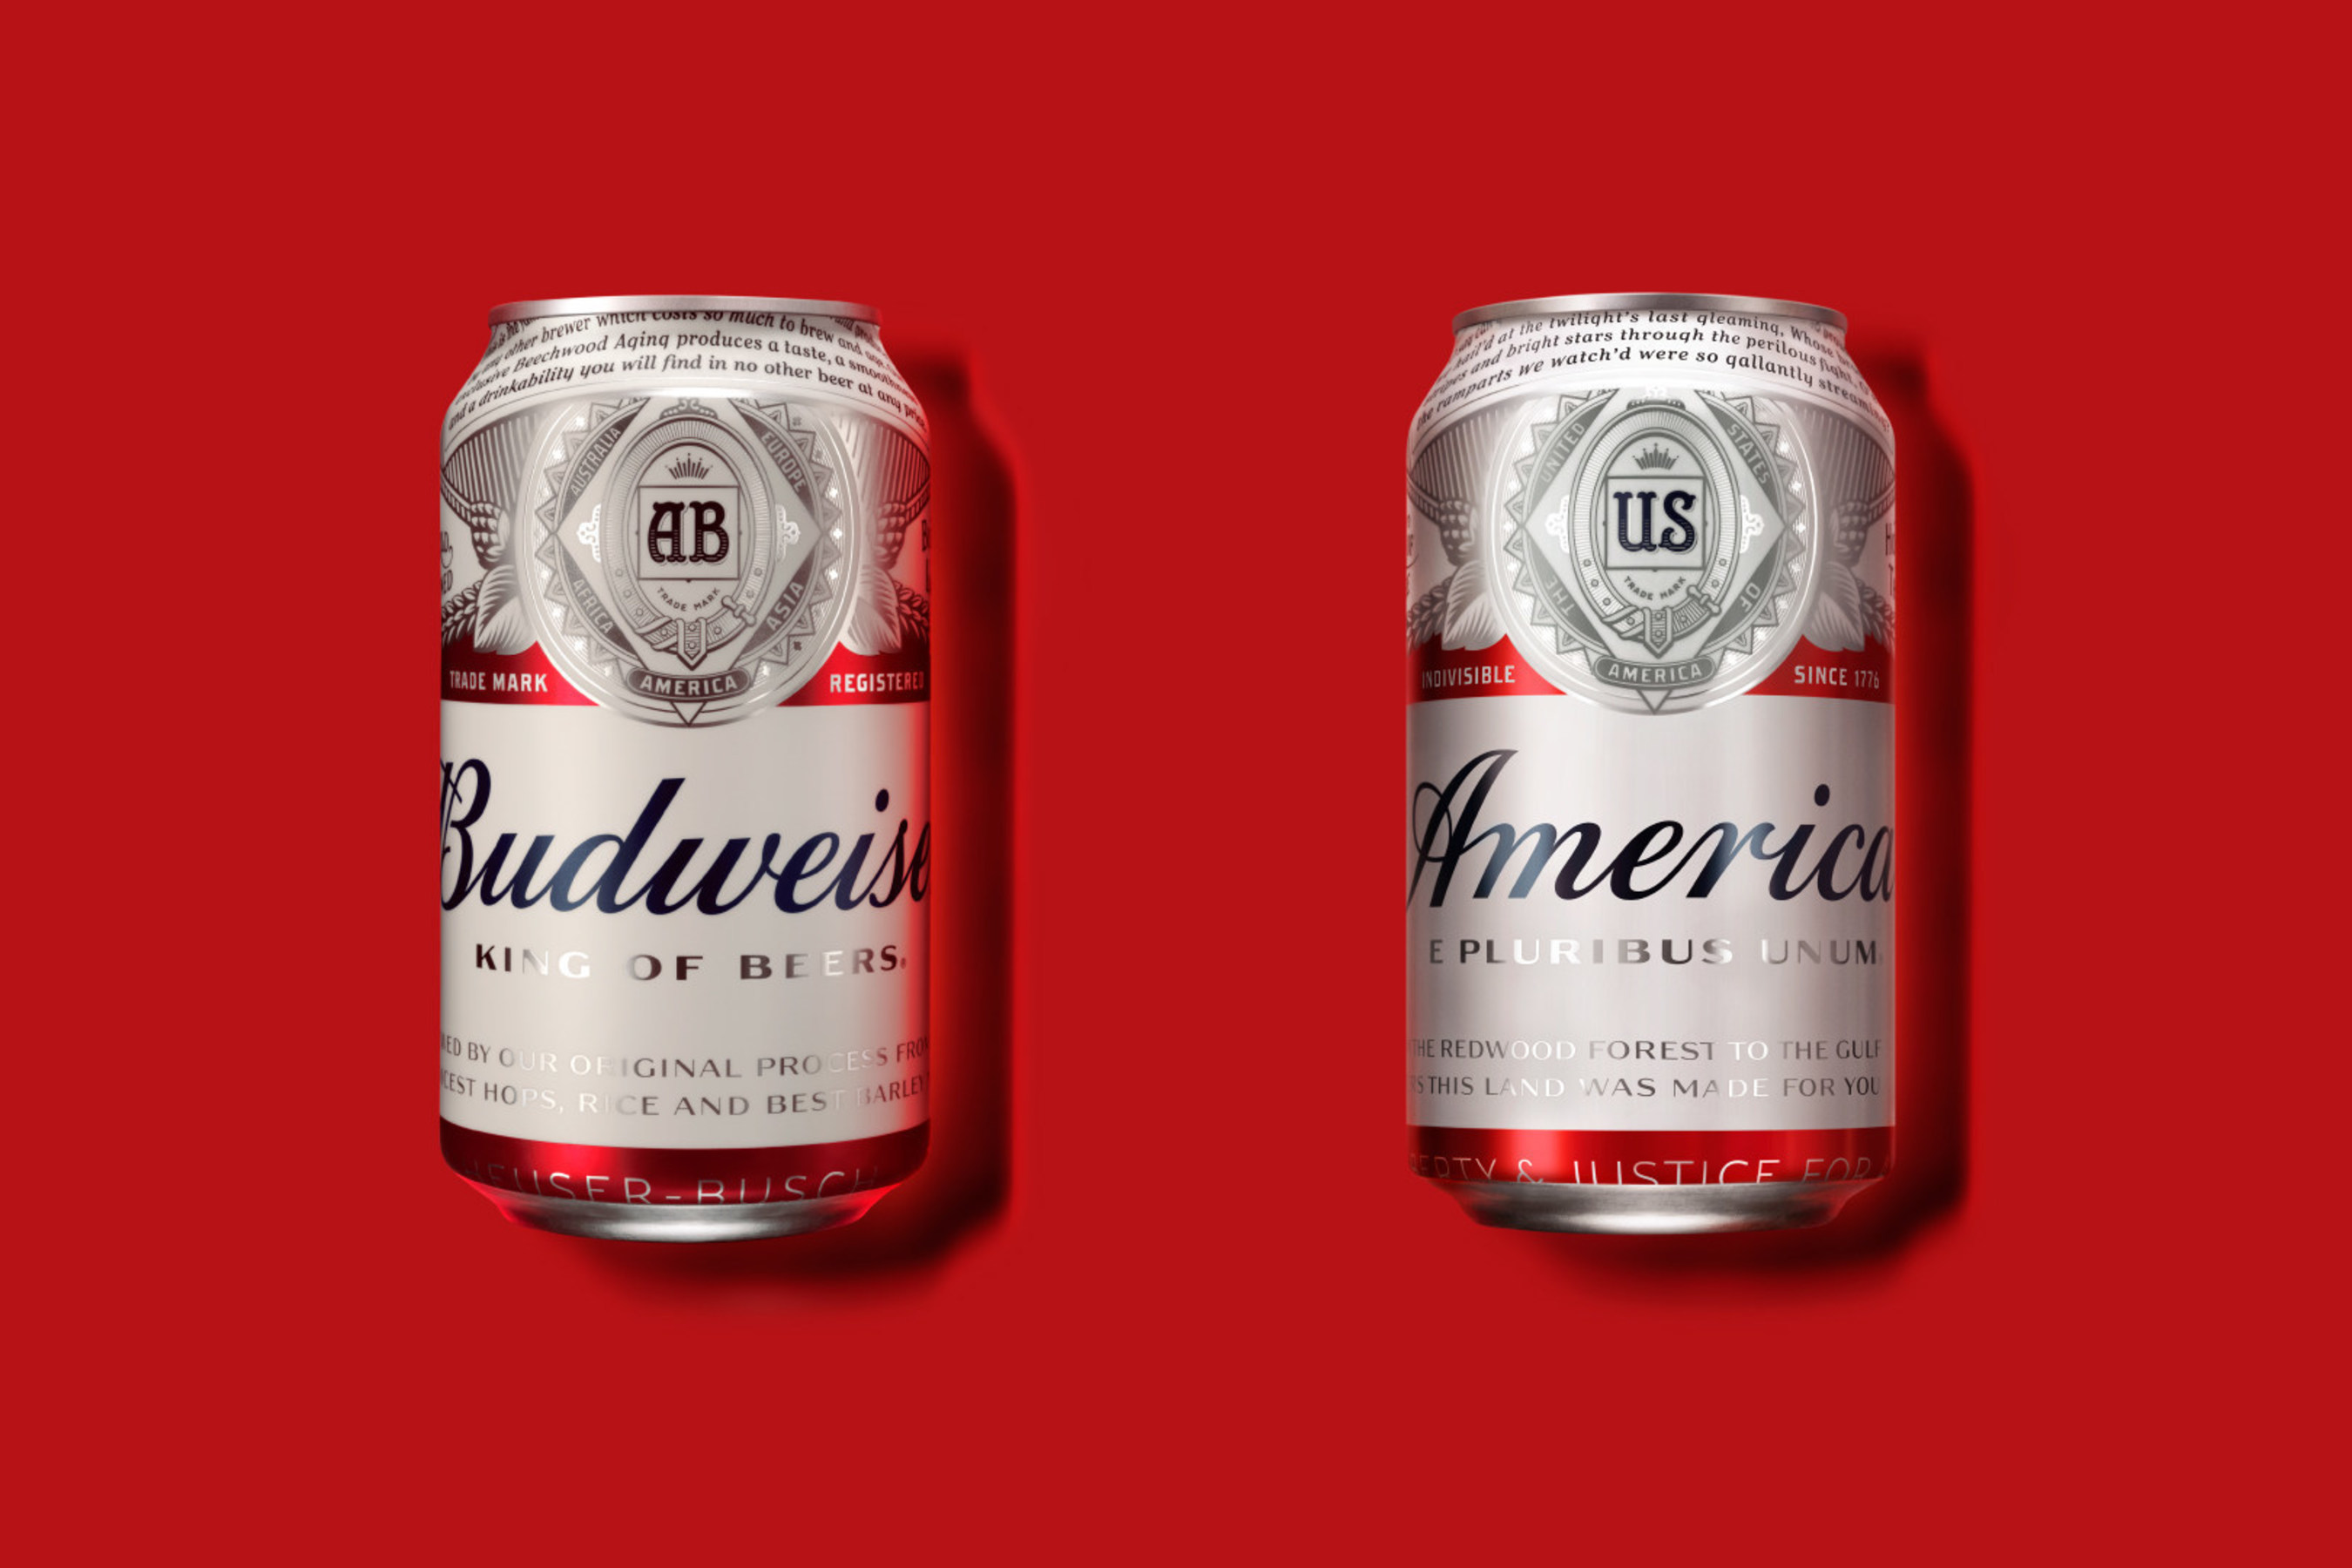 Budweiser Emblazons America on Cans and Bottles to kick off its Most Patriotic Summer Ever